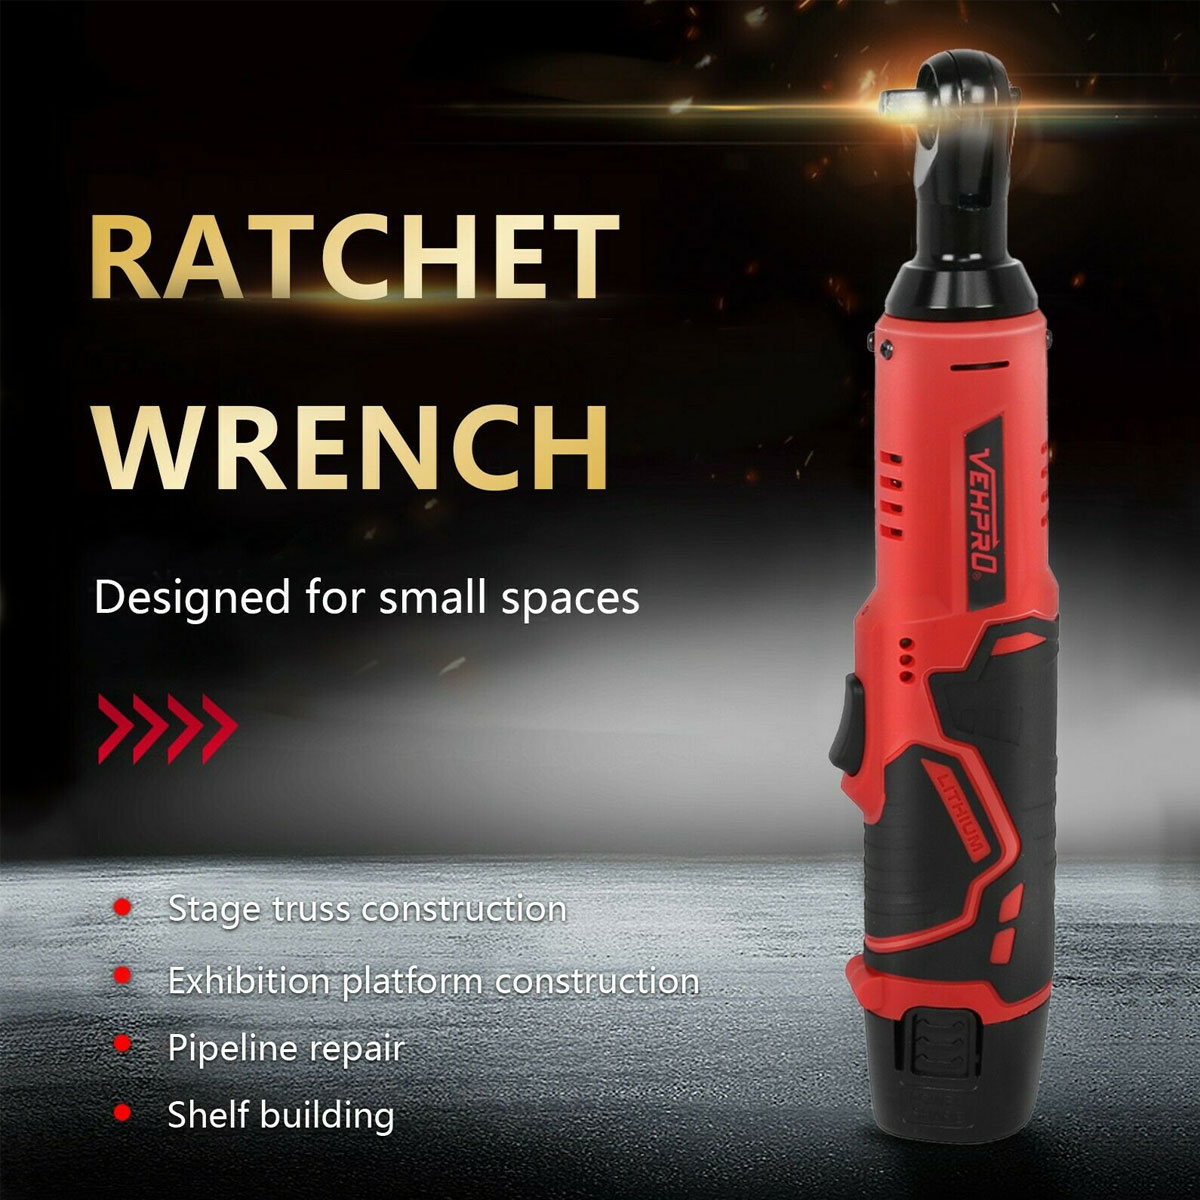 18V-45NM-Cordless-Eletctric-Ratchet-Wrench-38-Inch-Li-ion-Battery-Powered-Right-Angle-Wrench-With-2P-1843576-4